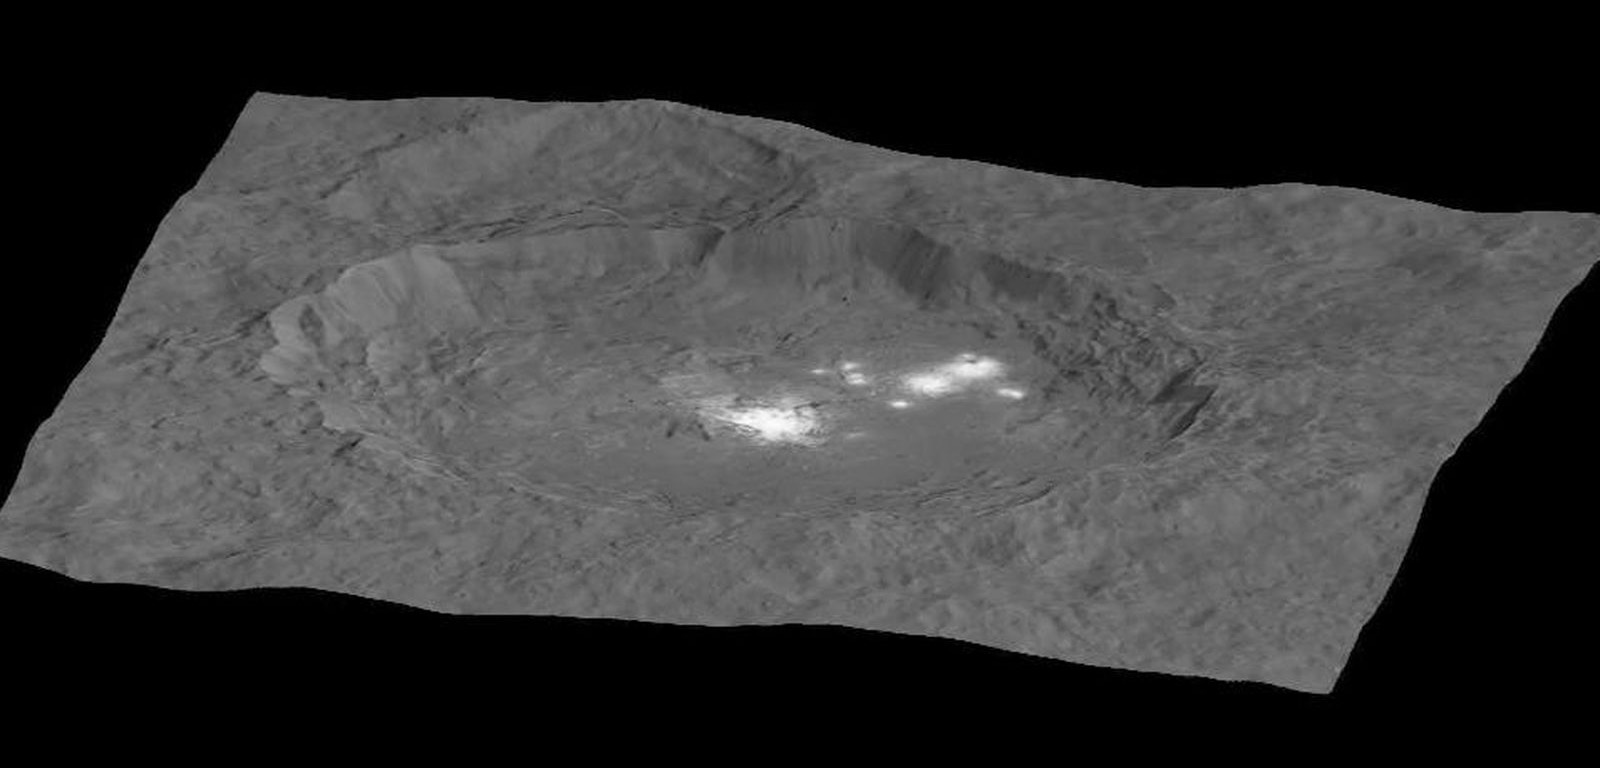 Circling the Lights of Occator crater on Ceres.  This image, made using images taken by NASA's Dawn spacecraft during the mission's High Altitude Mapping Orbit (HAMO) phase  and draped over a shape model, shows Occator crater on Ceres, home to a collection of intriguing bright spots.  The image  has been stretched by 1.5 times in the vertical direction to better illustrate the crater's topography.  Credits: NASA/JPL-Caltech/UCLA/MPS/DLR/IDA